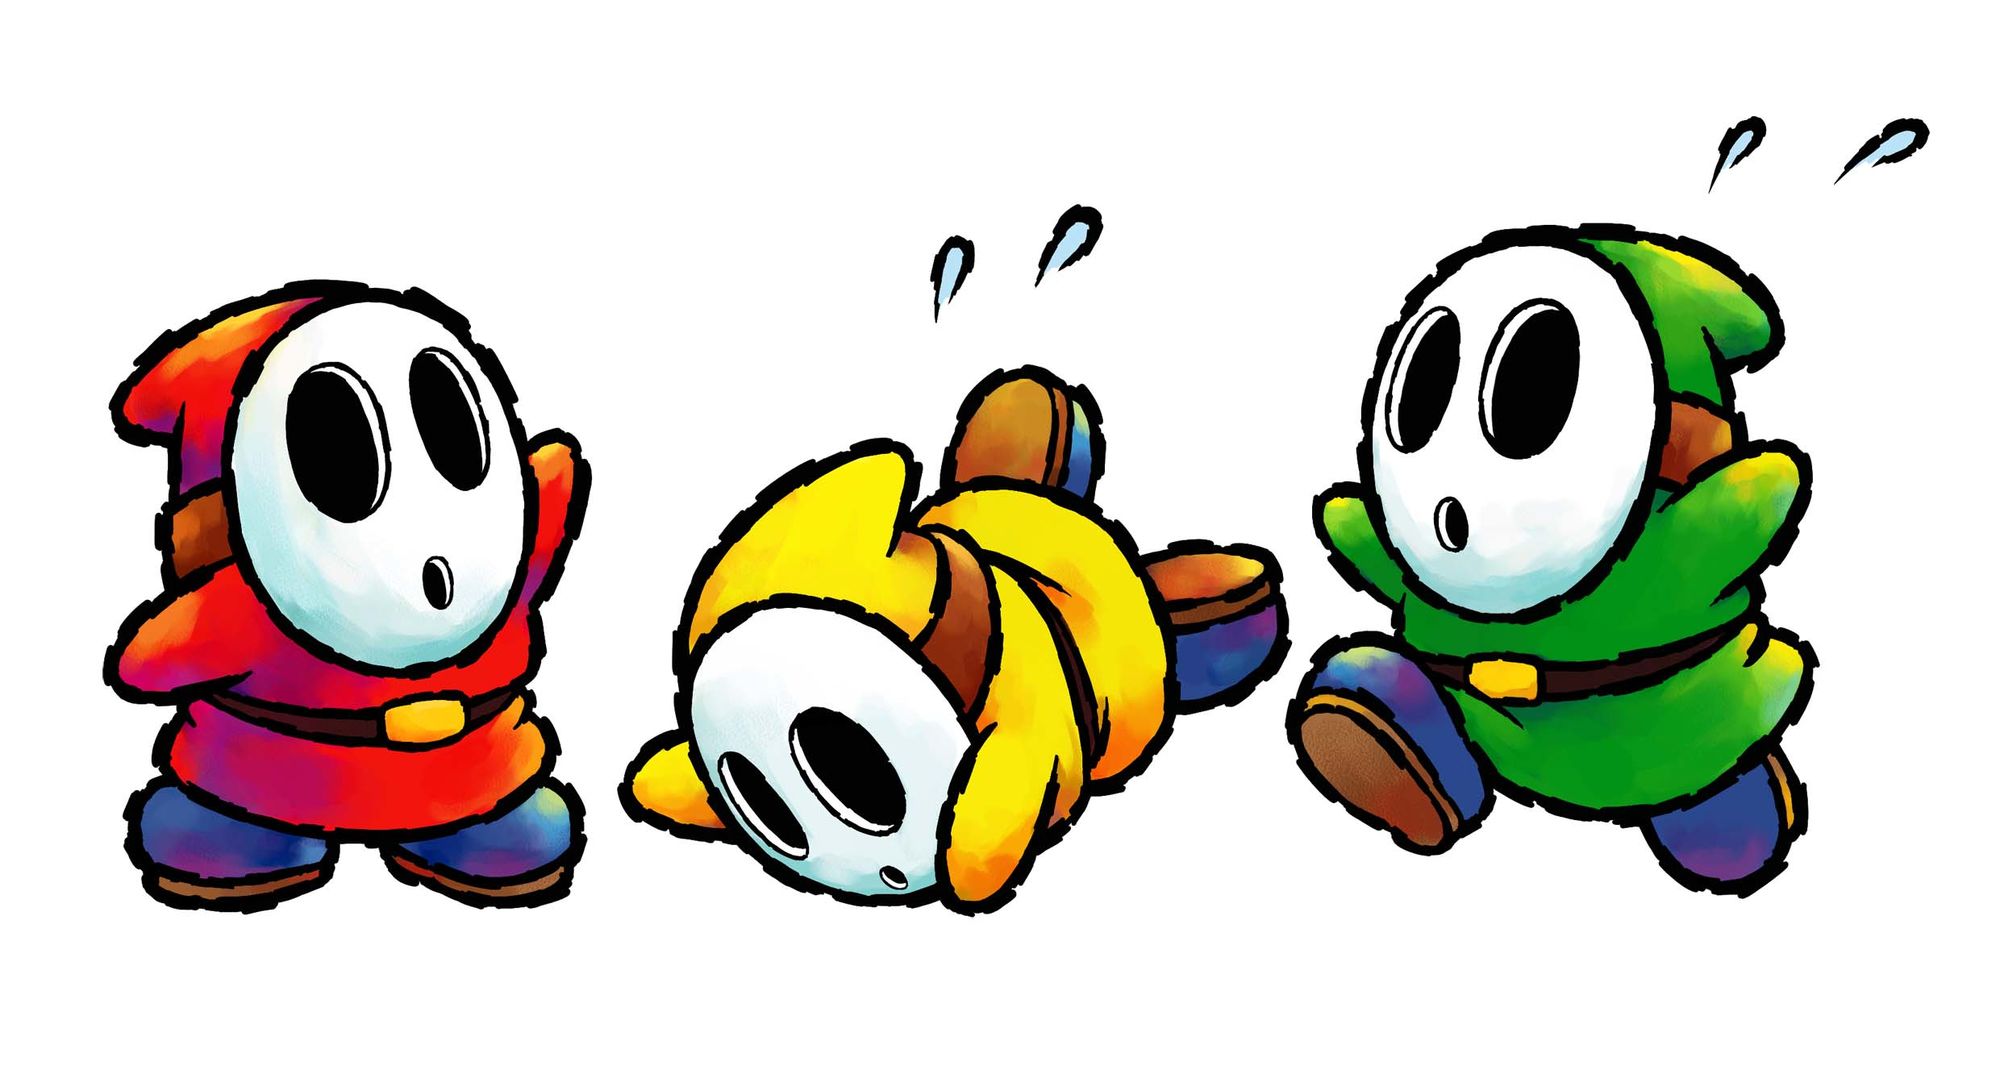 Clip Arts Related To : shy guy mario kart drawing. view all Shy Man Clipart...